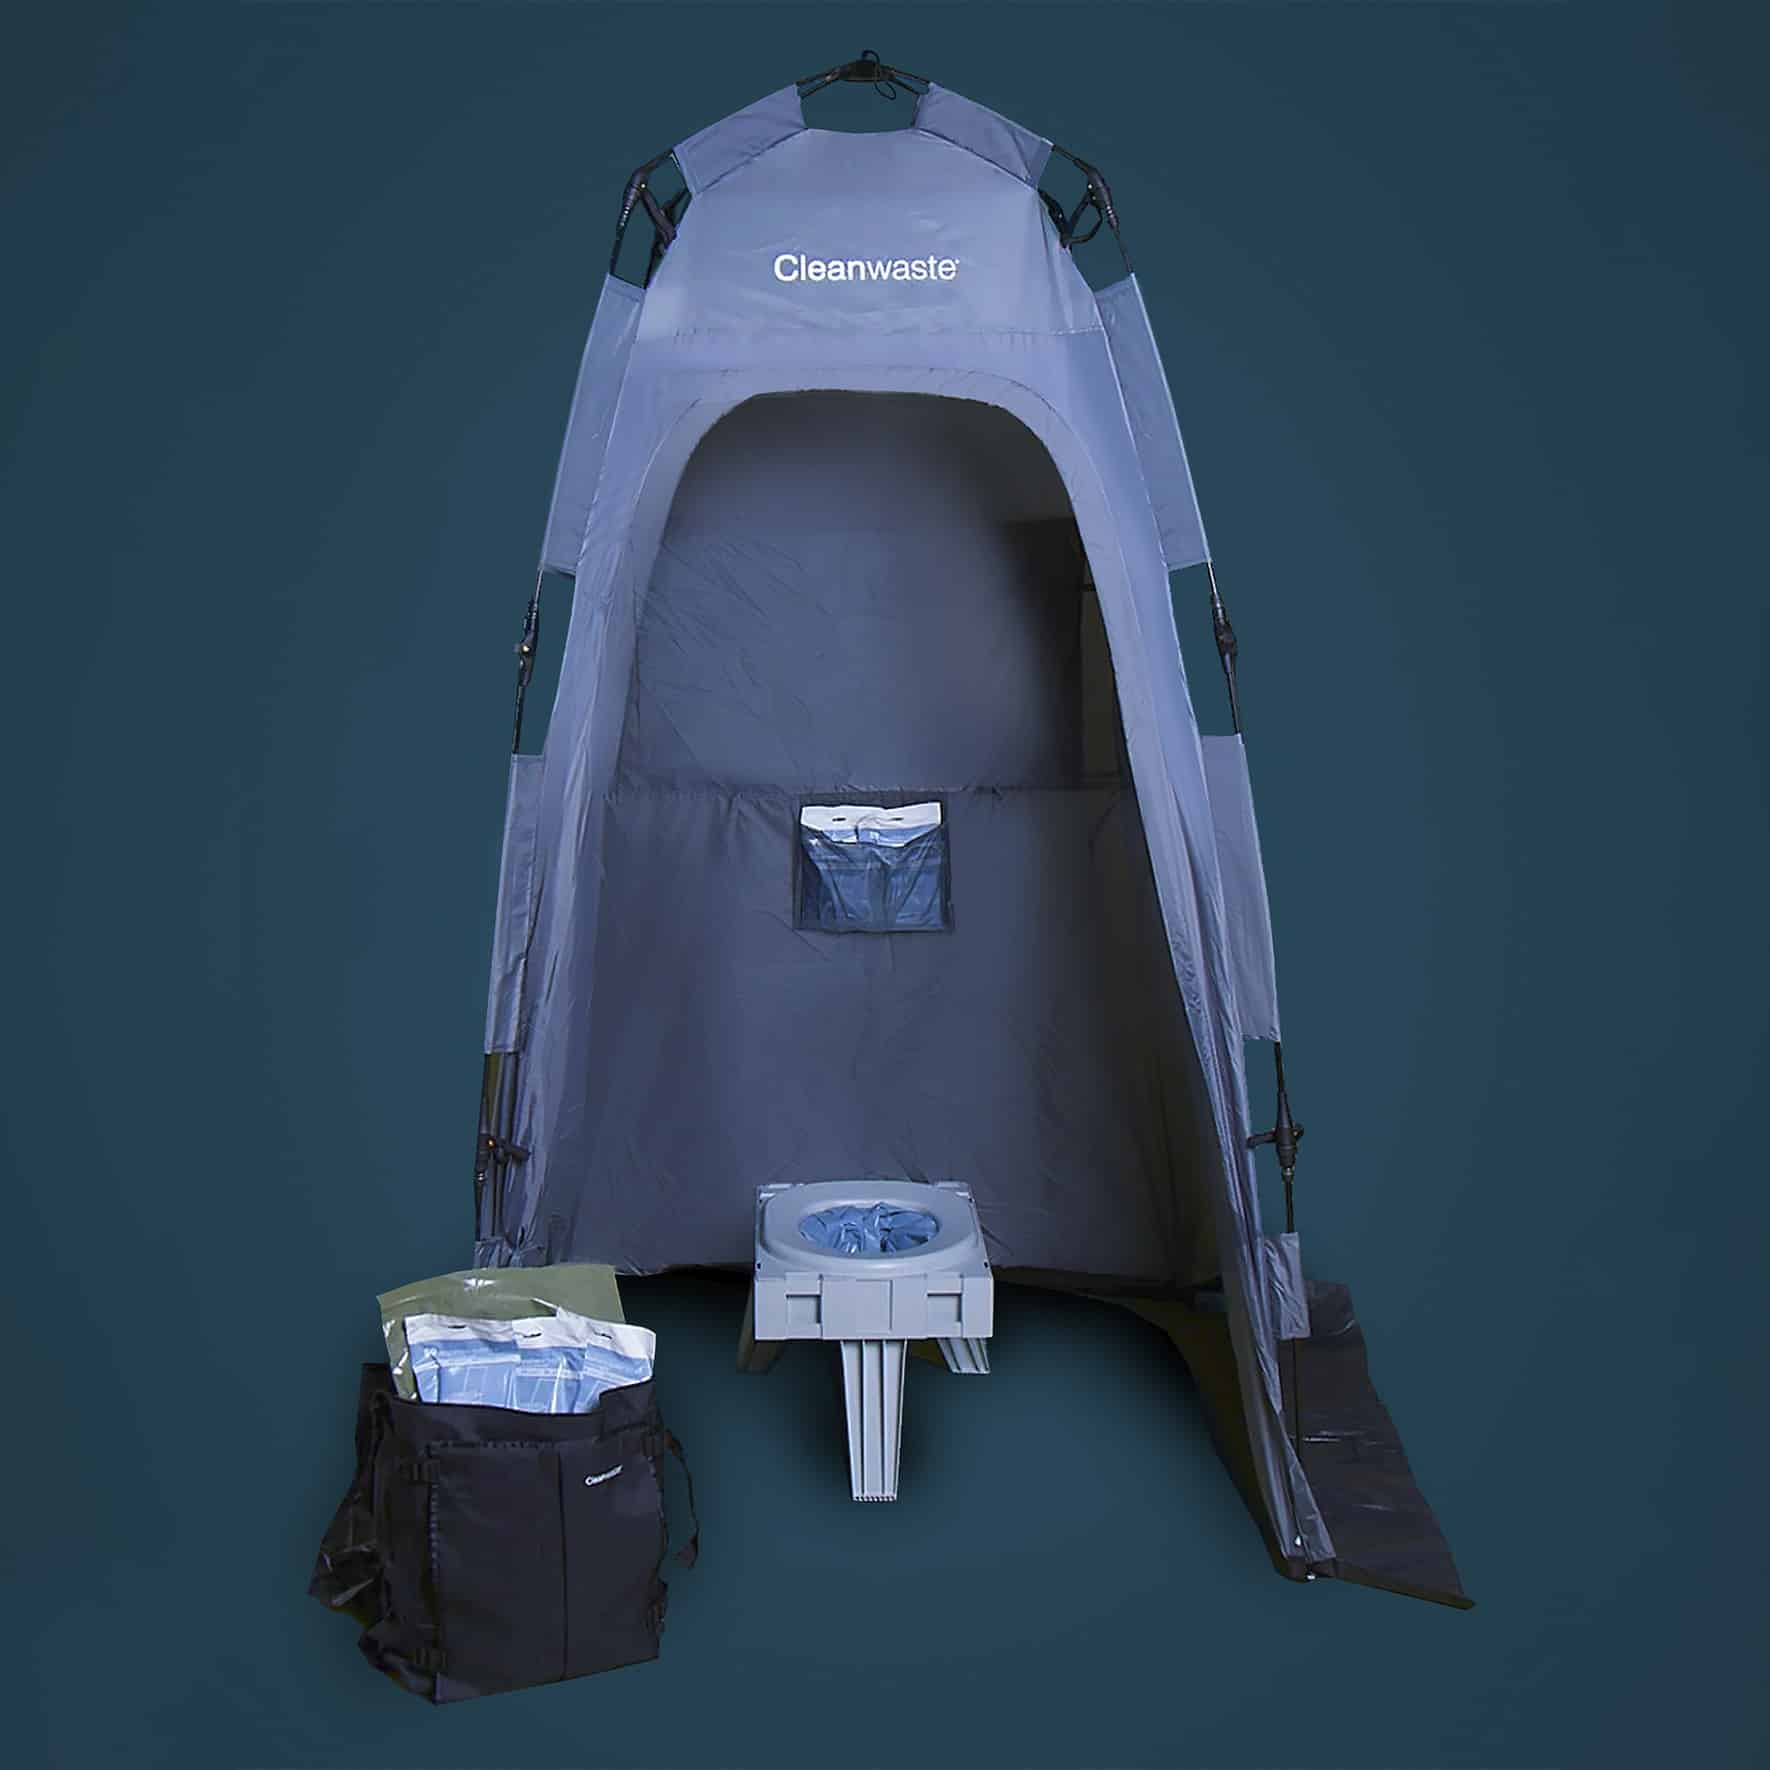 Cleanwaste GO Anywhere Toilet by Ezygonow Review - 4WD ADVENTURER